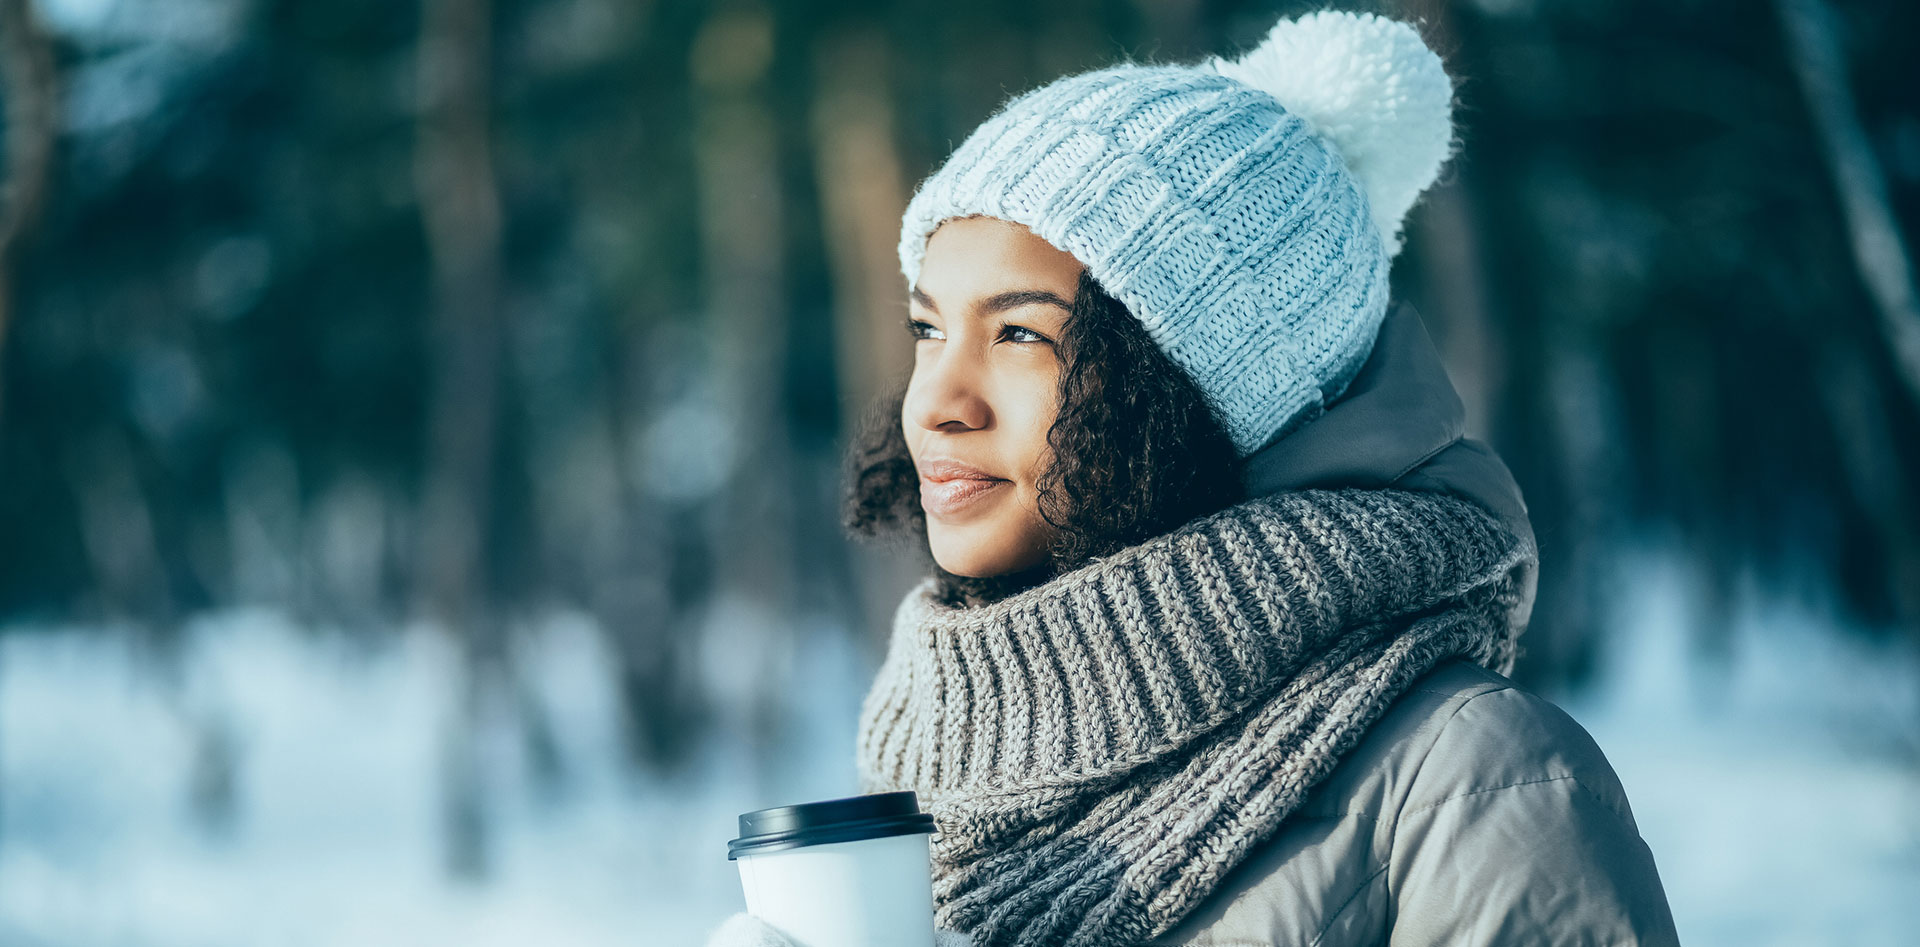 A young woman in a hat and mittens, holding a cup of coffee, outside in winter